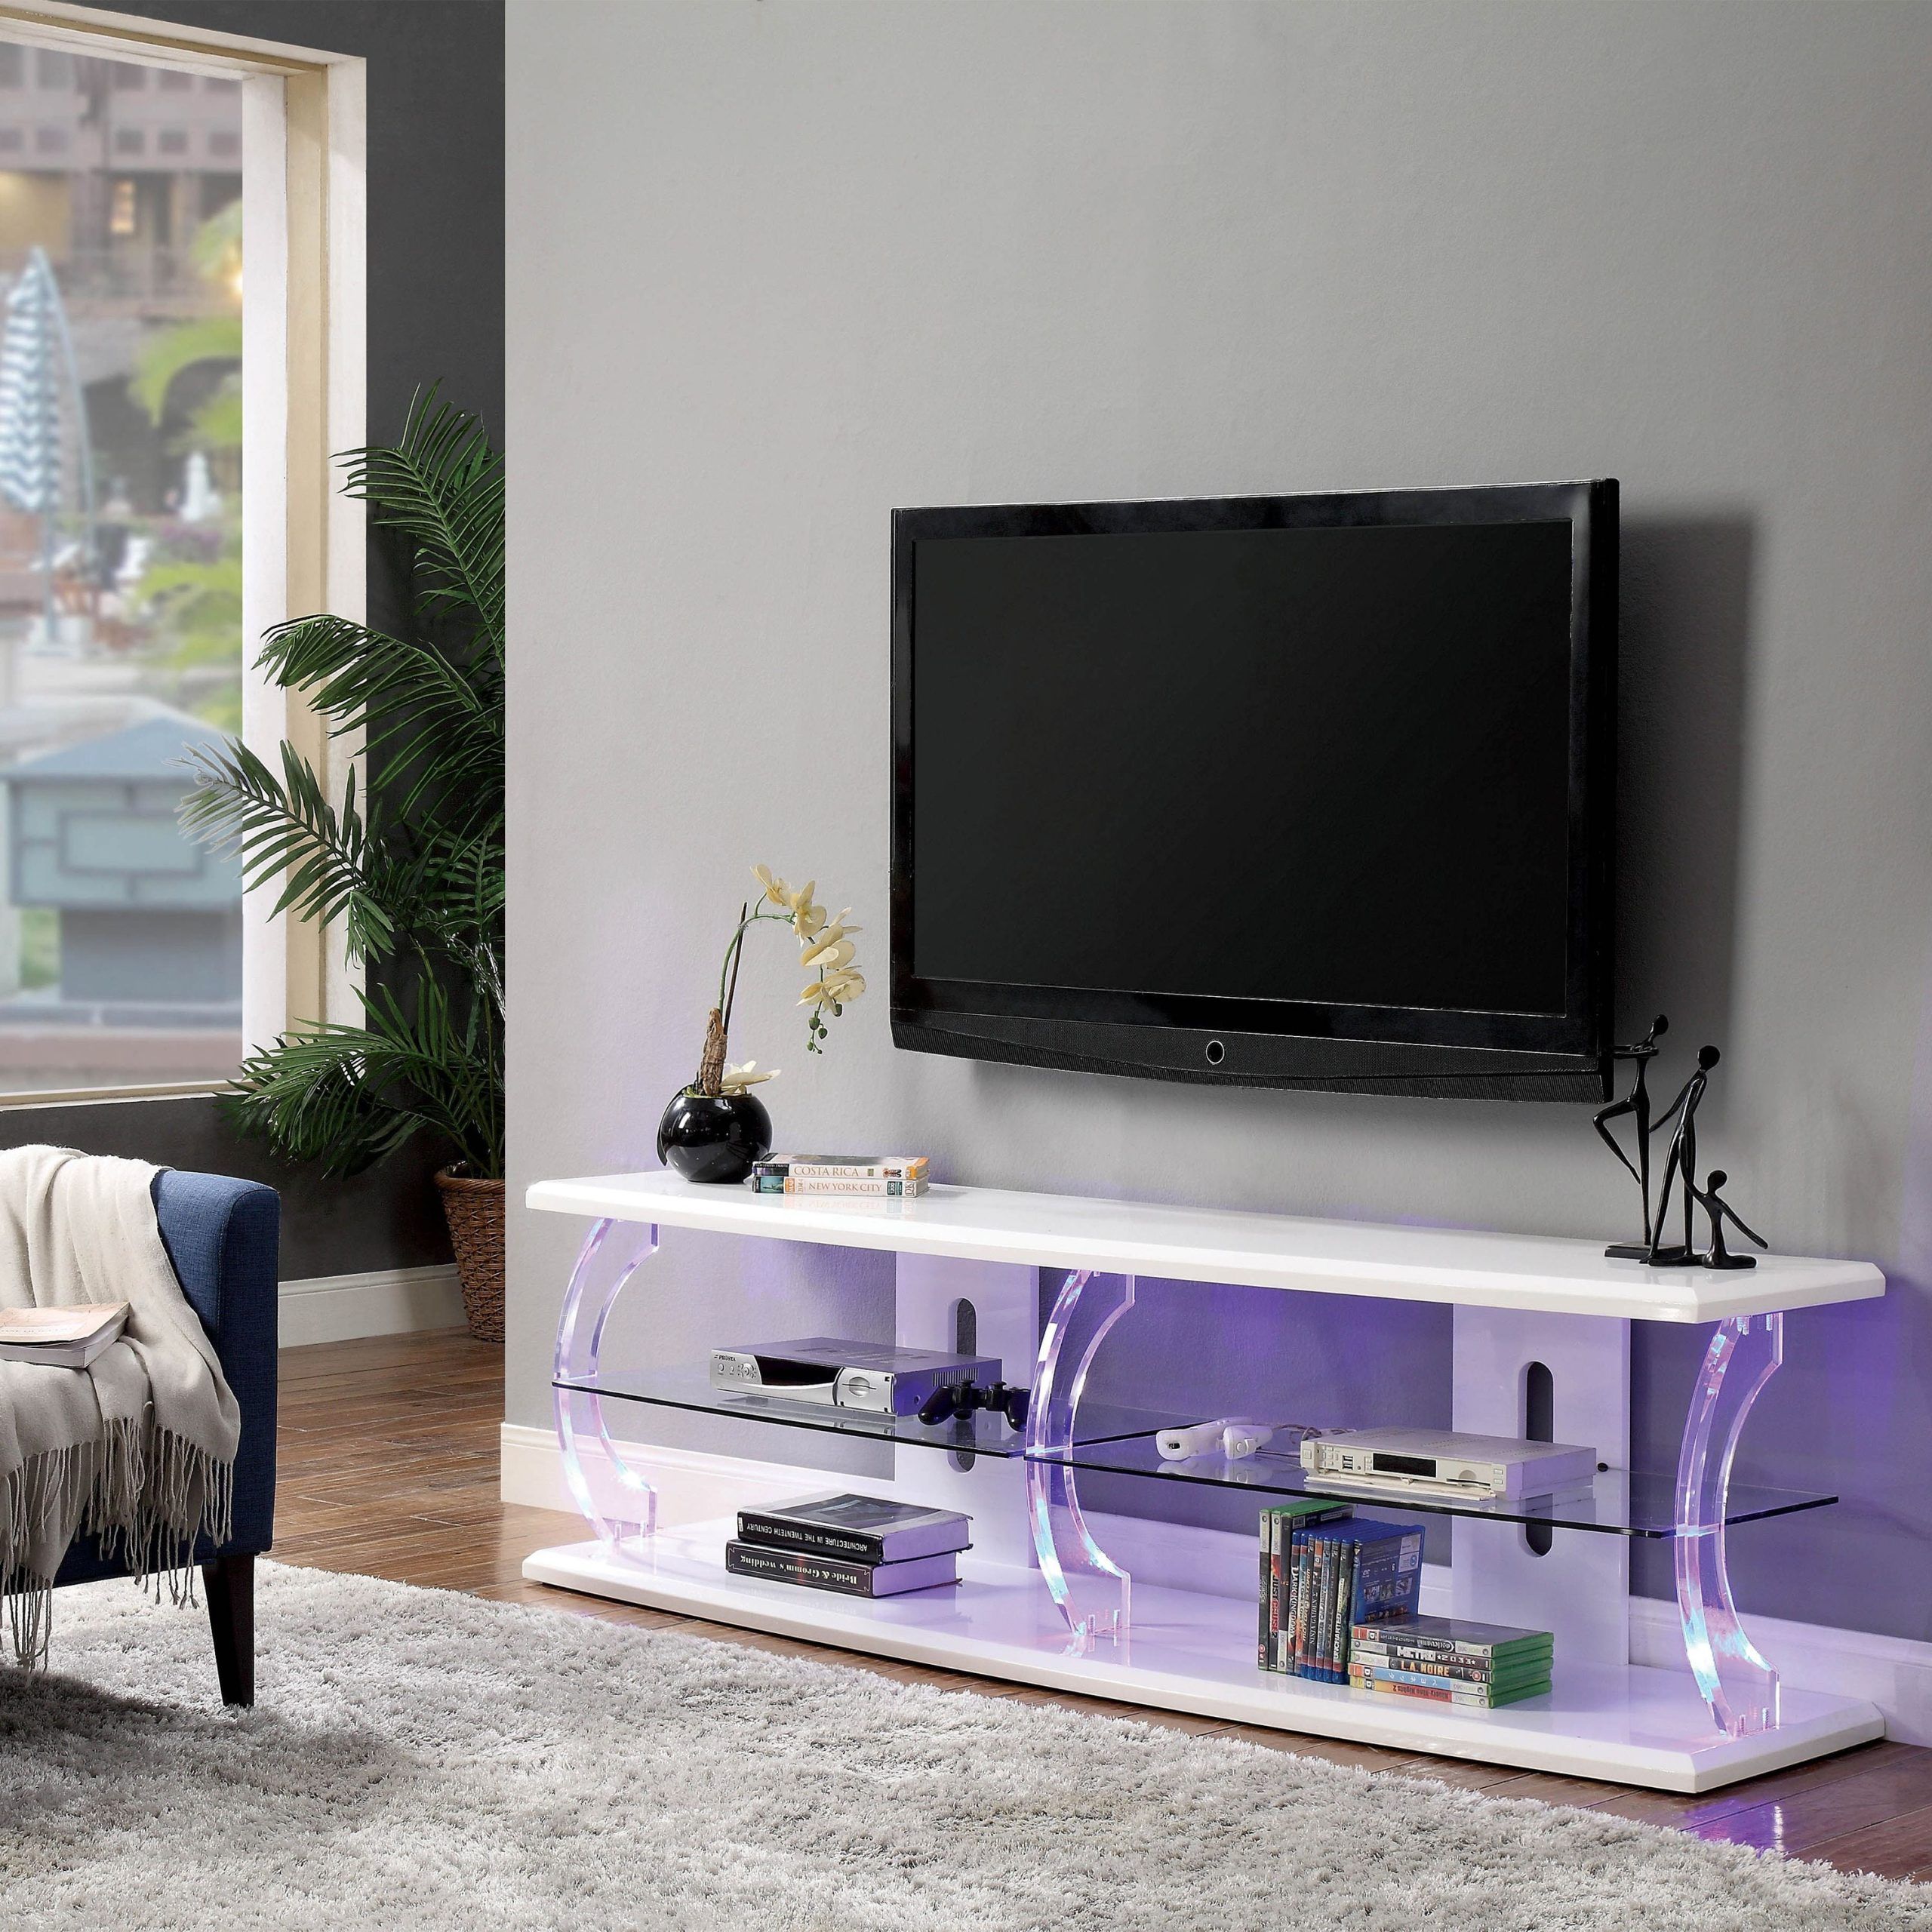 Furniture Of America Vedot Contemporary Led Tv Stand, 72", White And In Tv Stands With Led Lights &amp; Power Outlet (Gallery 4 of 20)